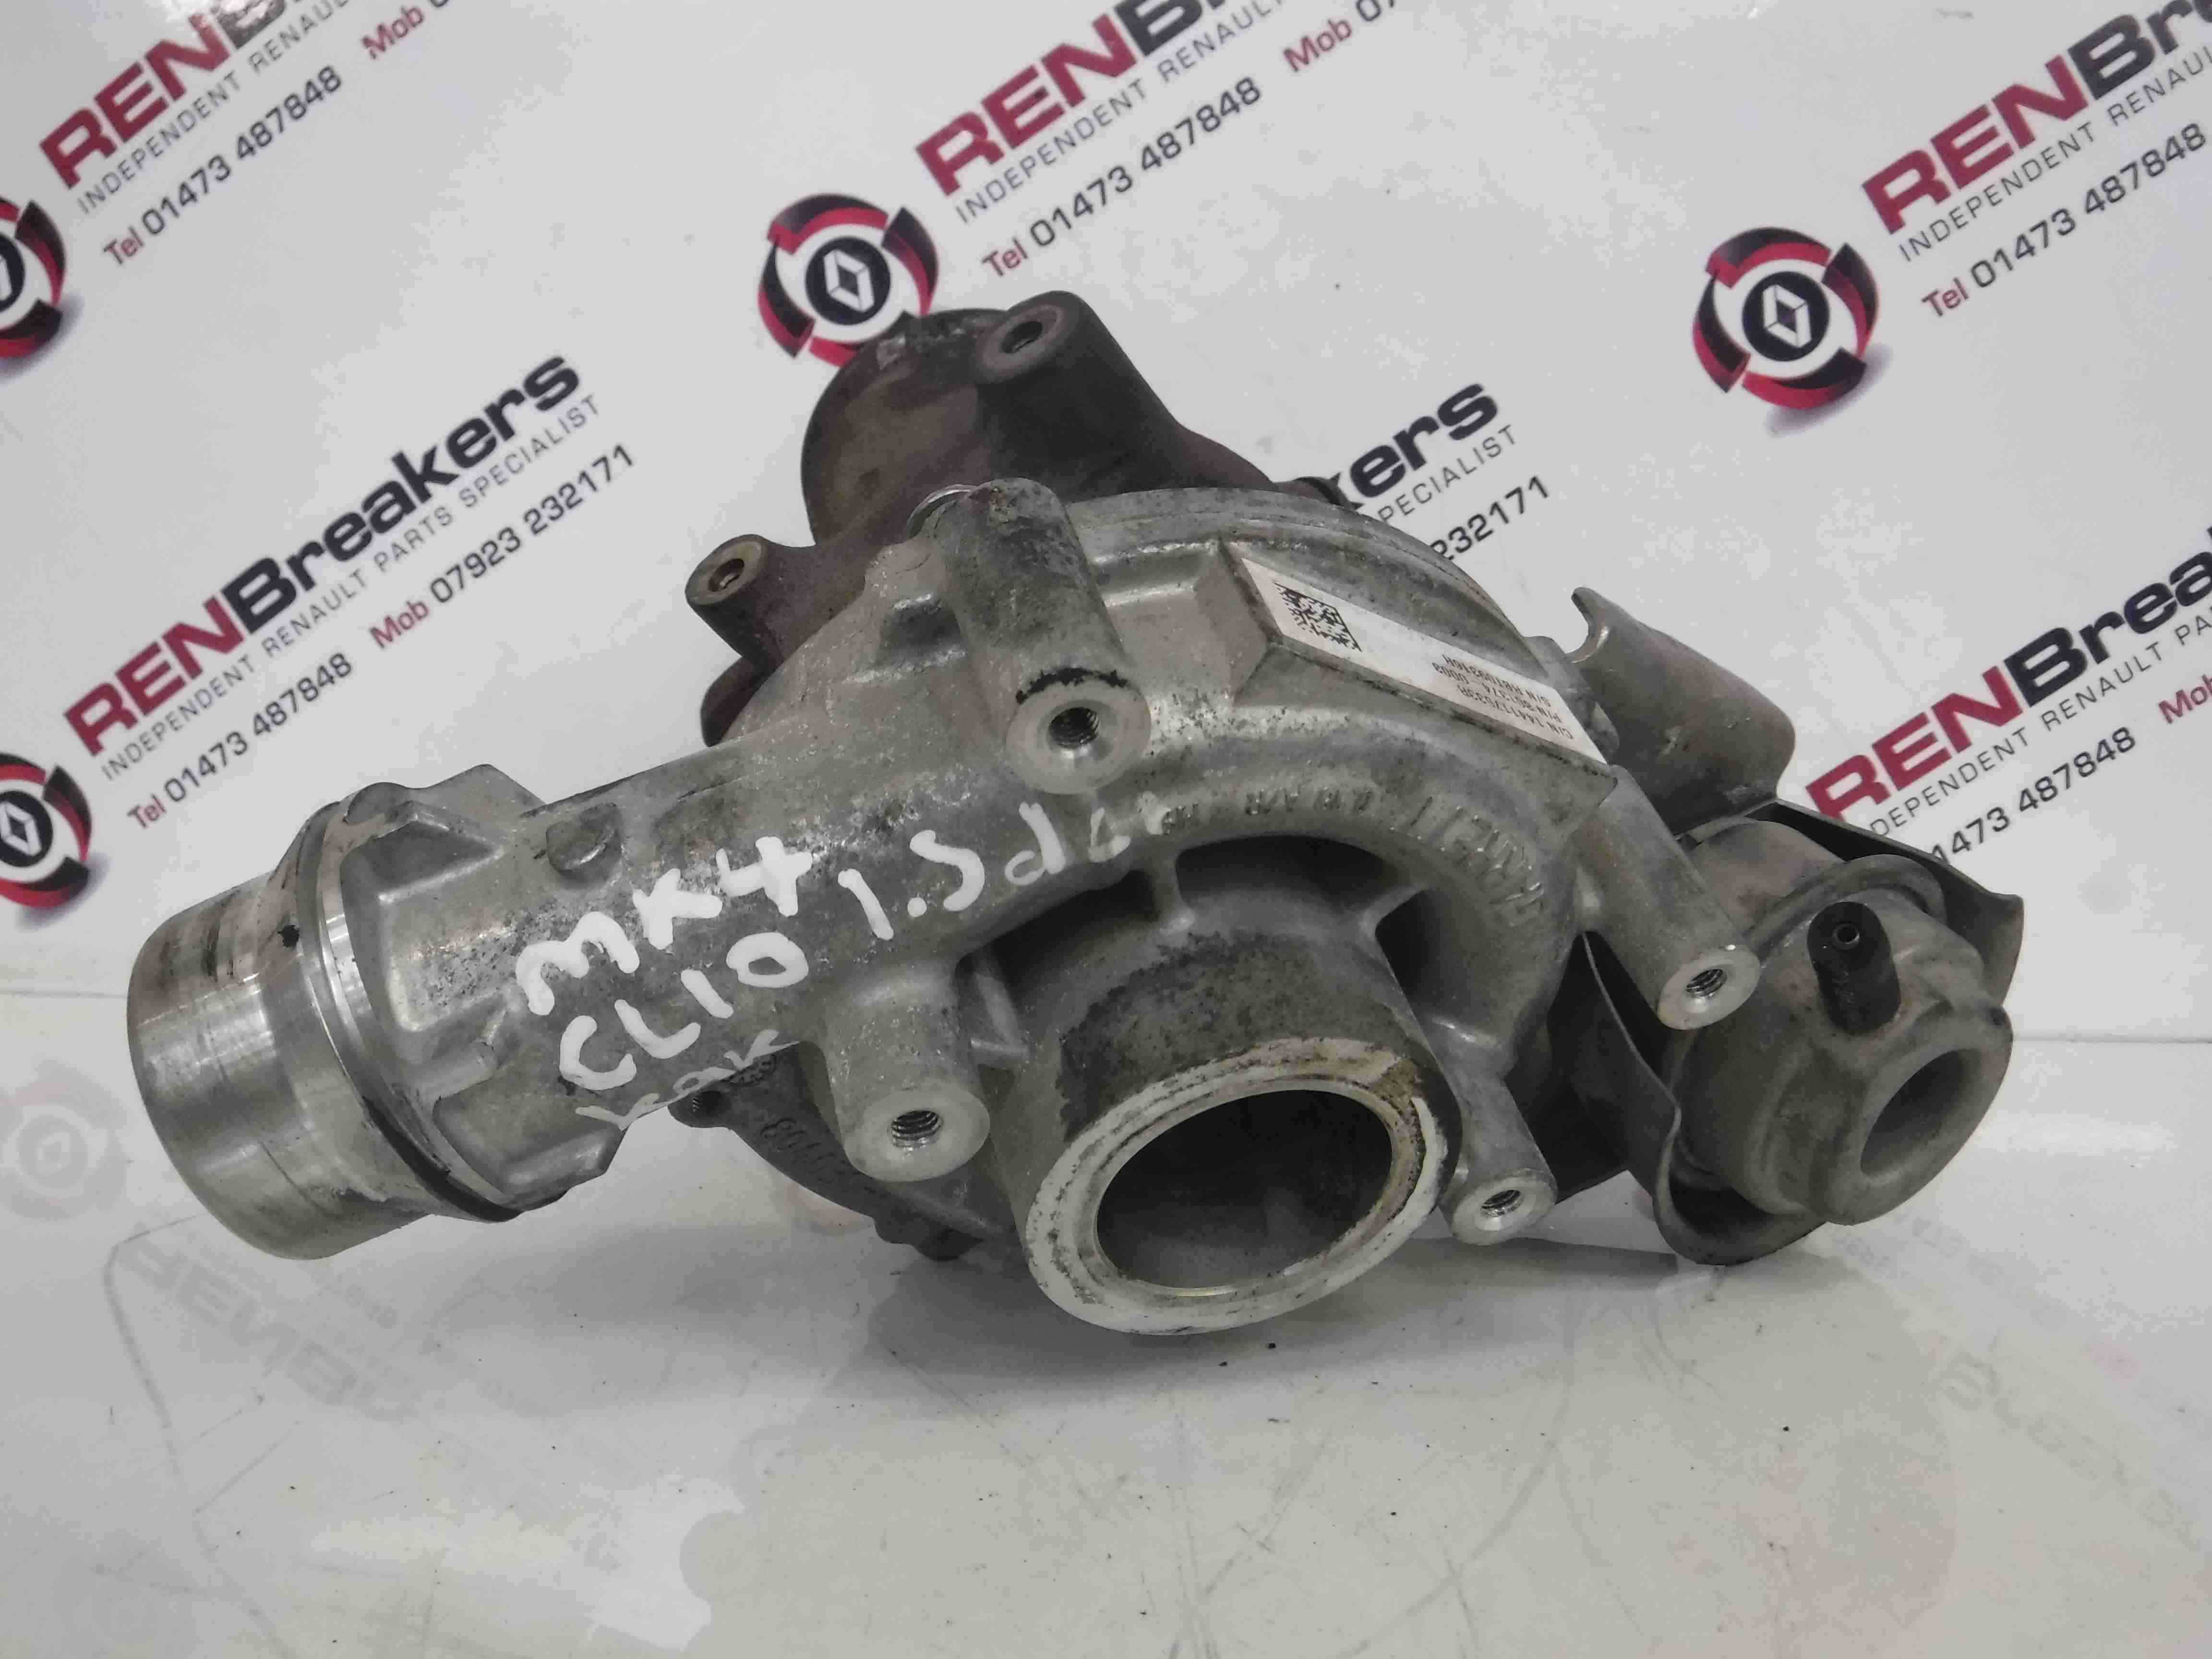 Renault Clio MK4 2013-2015 1.5 dCi Turbo Charger Unit 8201164371 144117533R